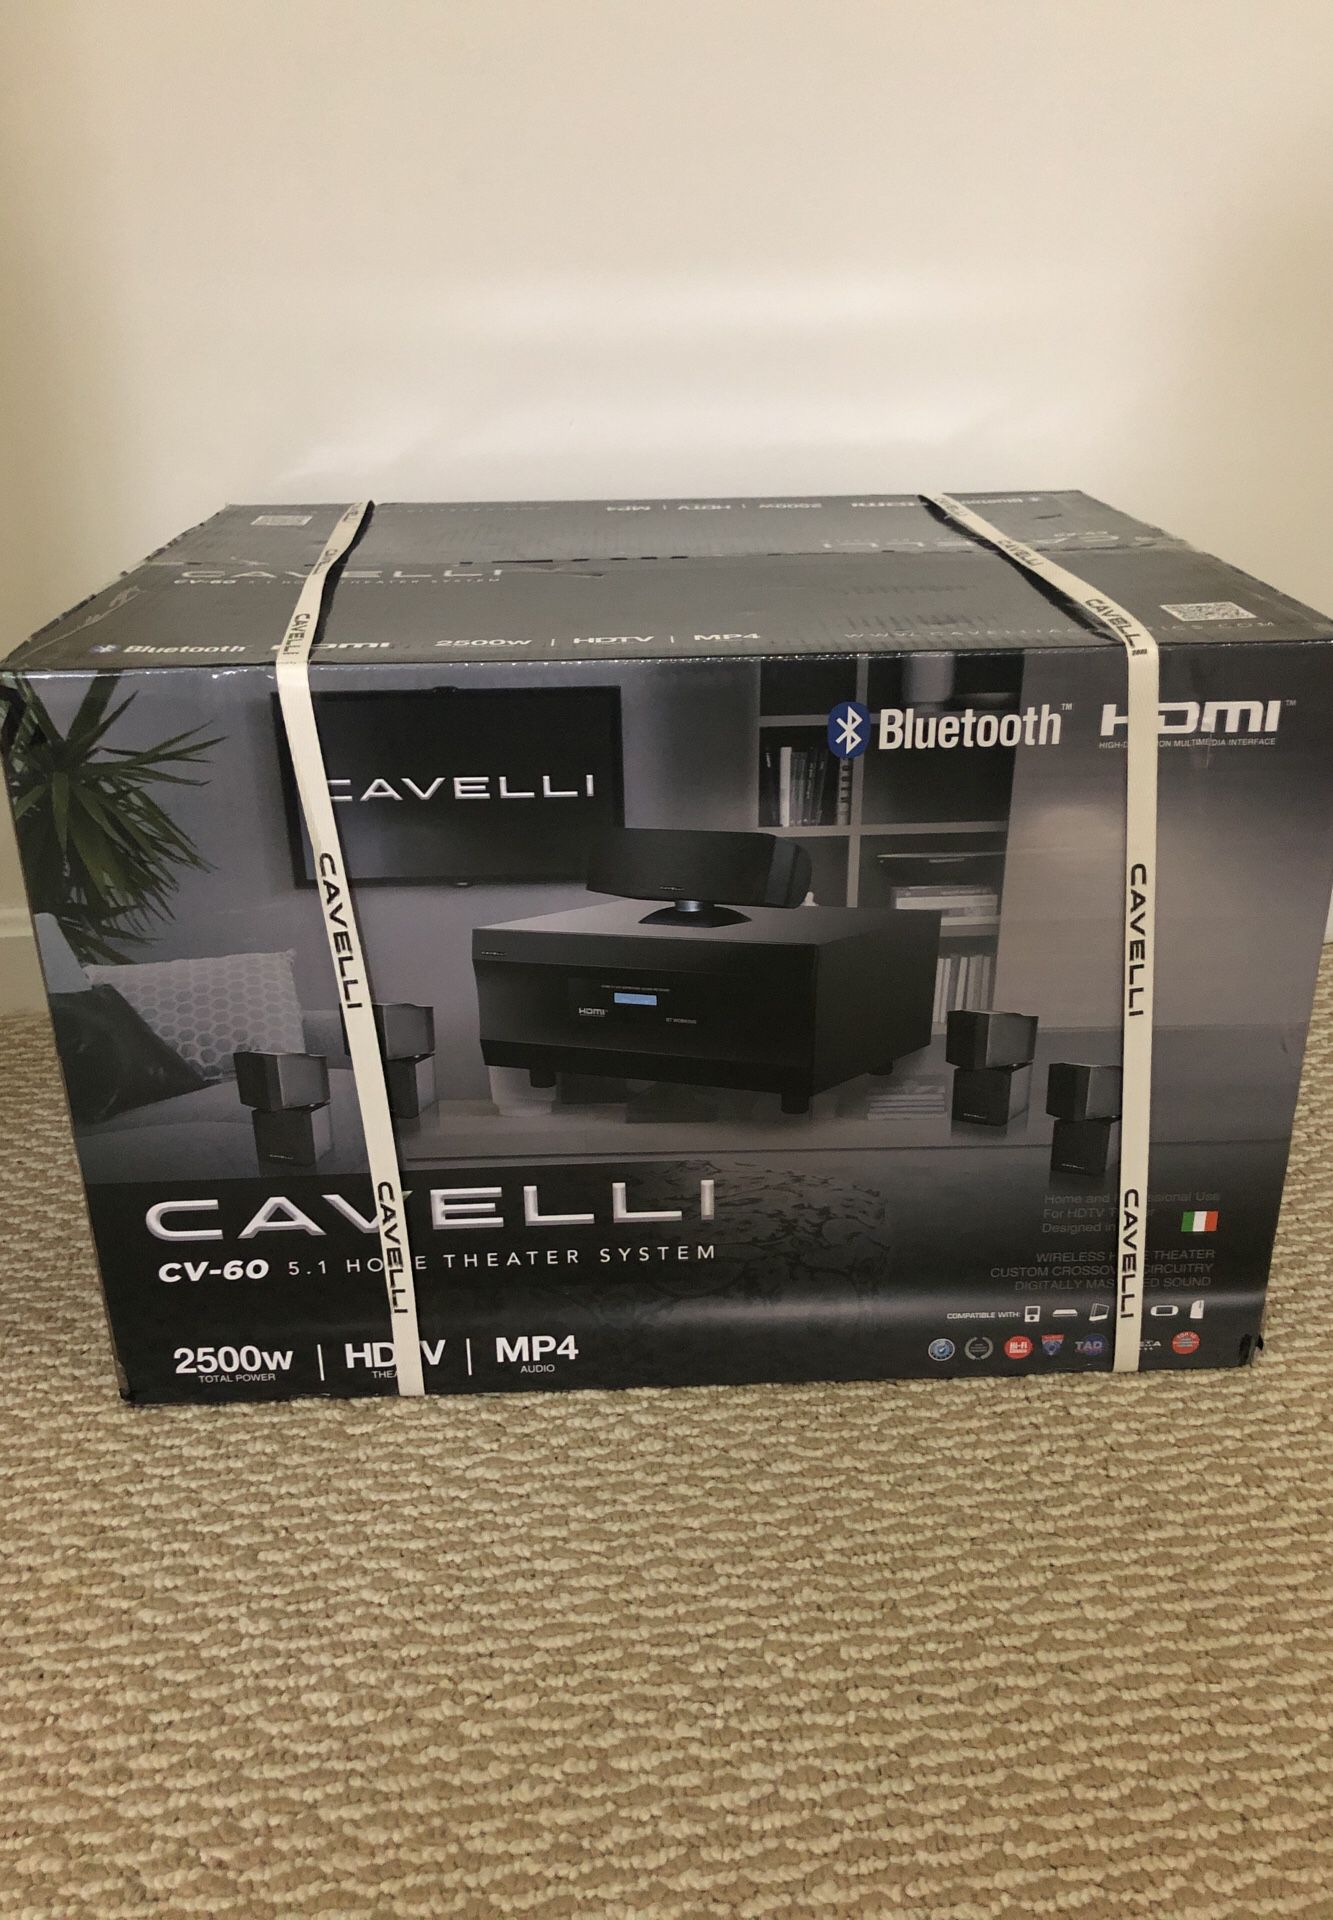 Cavelli CV-60 5.1 Home Theater System